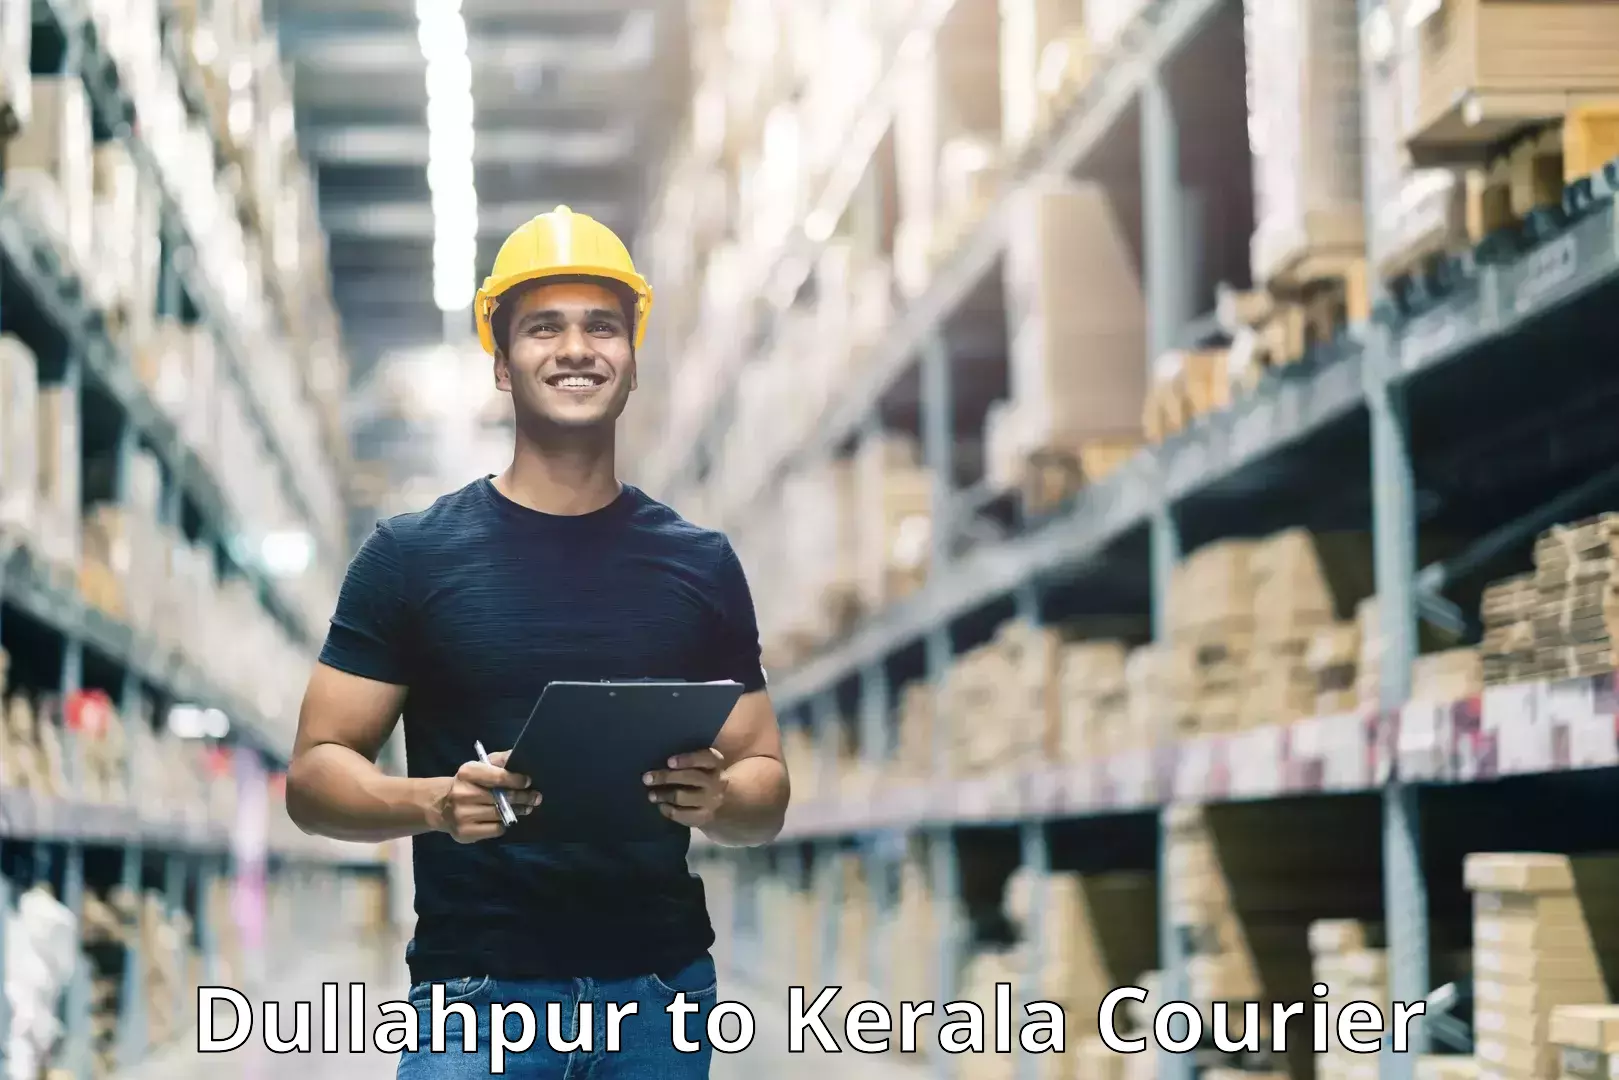 Express delivery capabilities Dullahpur to Ernakulam